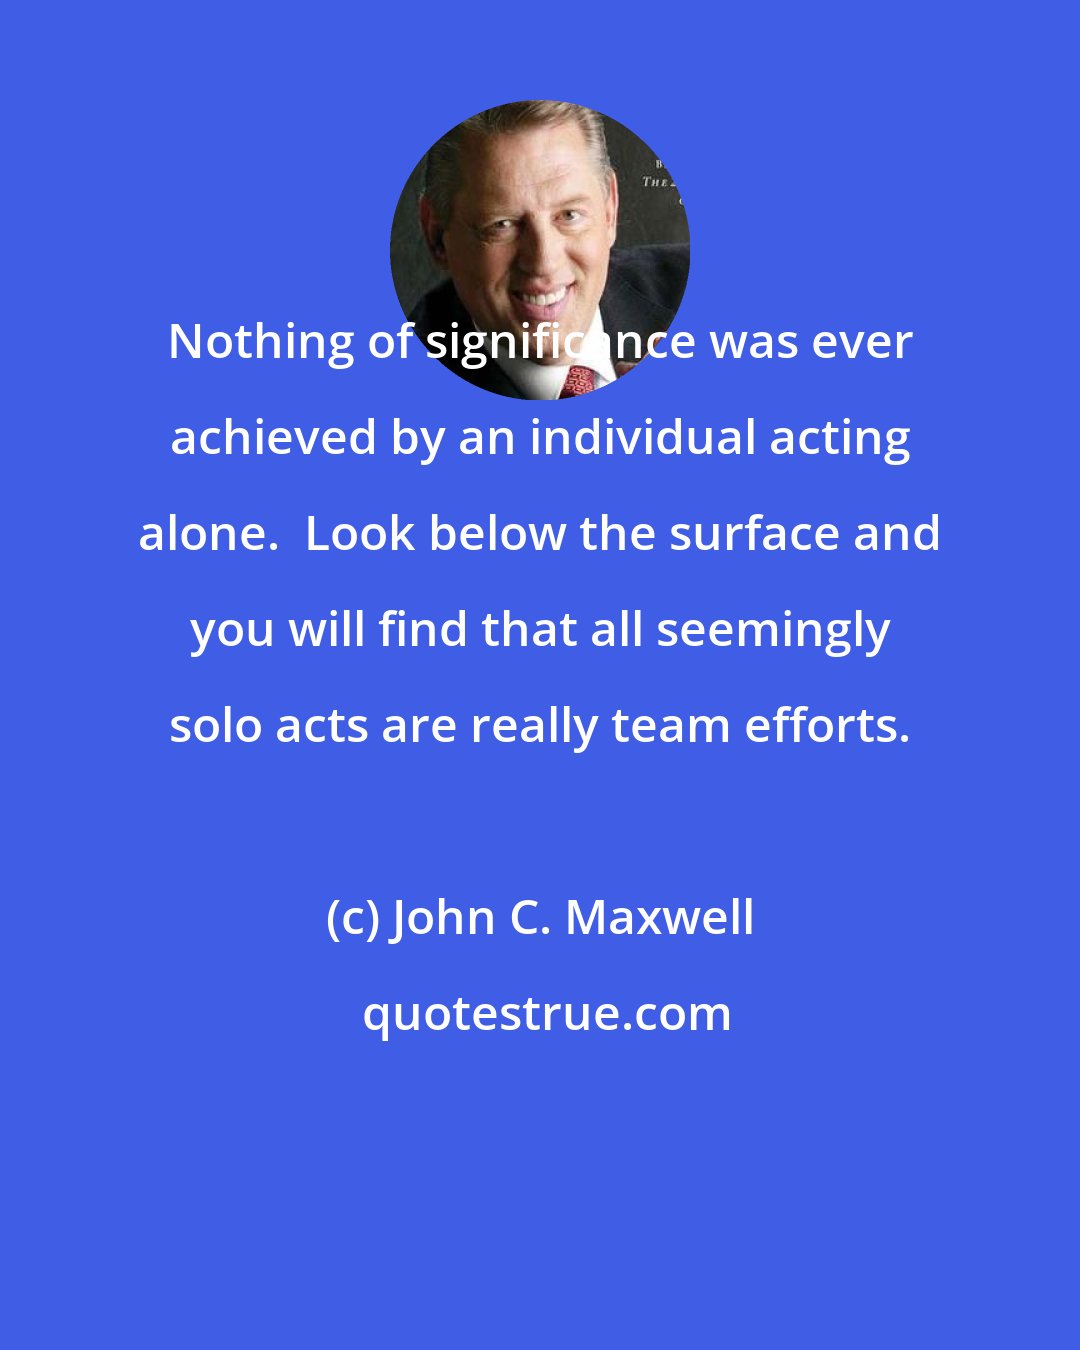 John C. Maxwell: Nothing of significance was ever achieved by an individual acting alone.  Look below the surface and you will find that all seemingly solo acts are really team efforts.